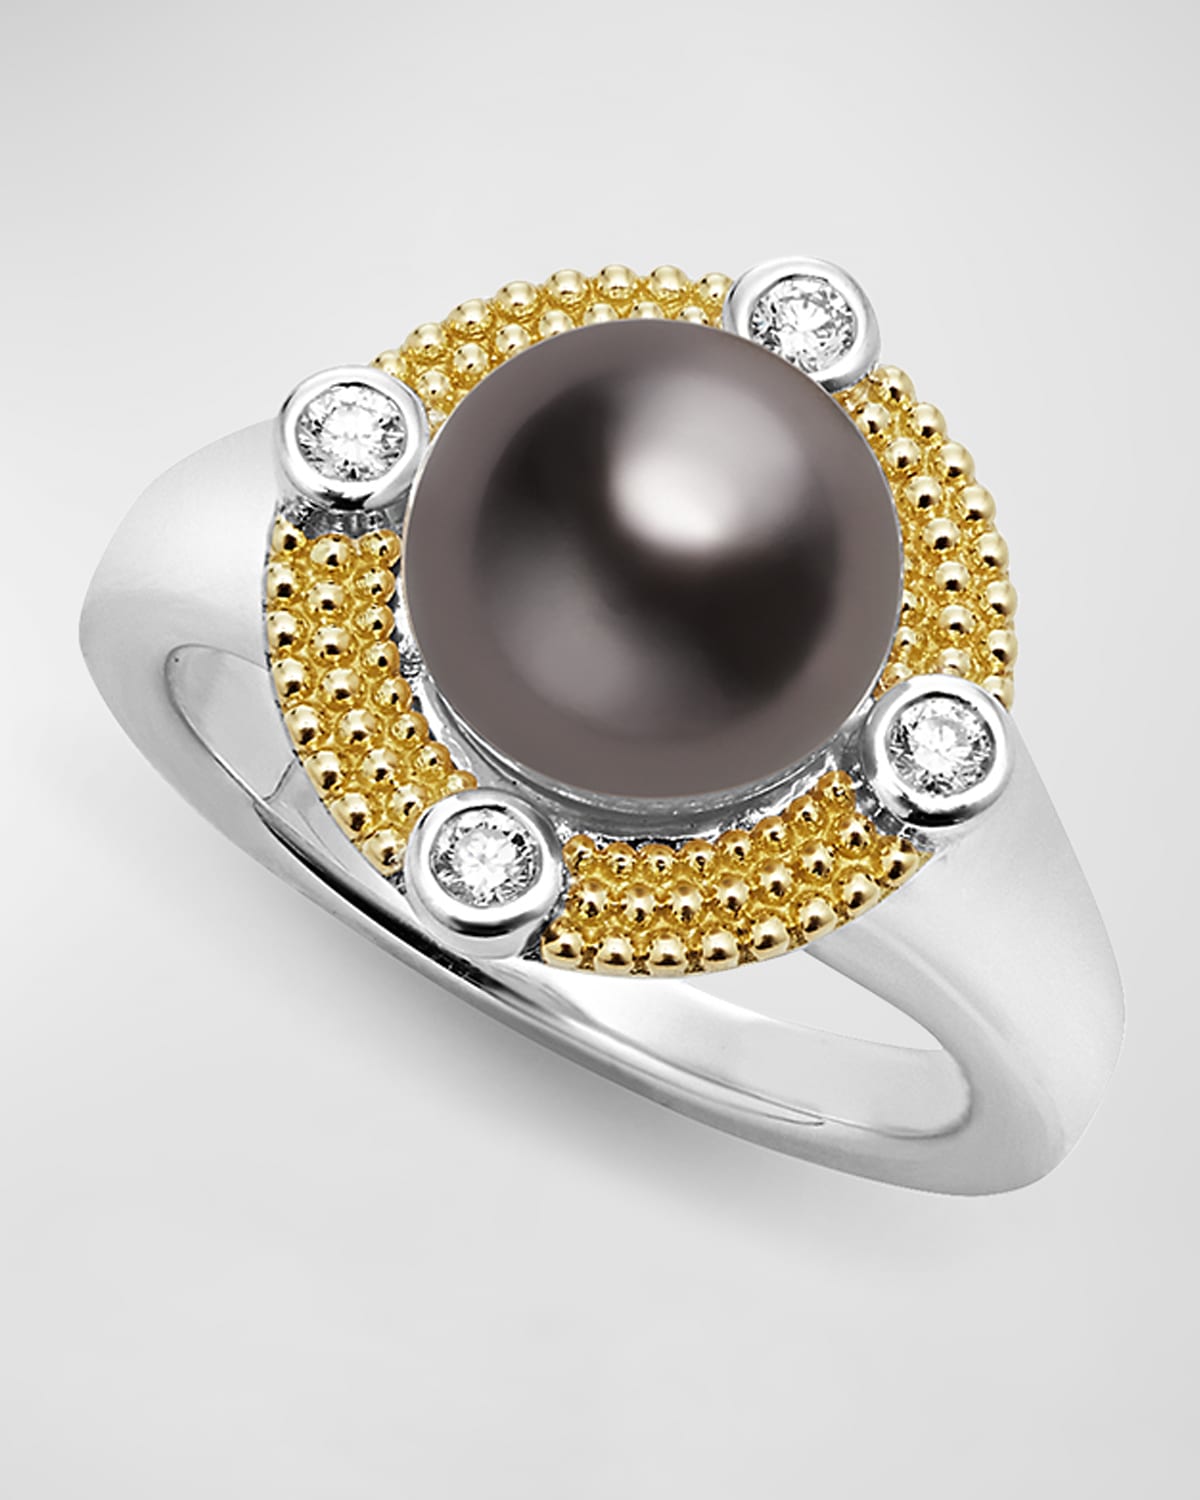 Sterling Silver and 18K Luna Black Pearl Lux with Diamonds Ring, Size 7